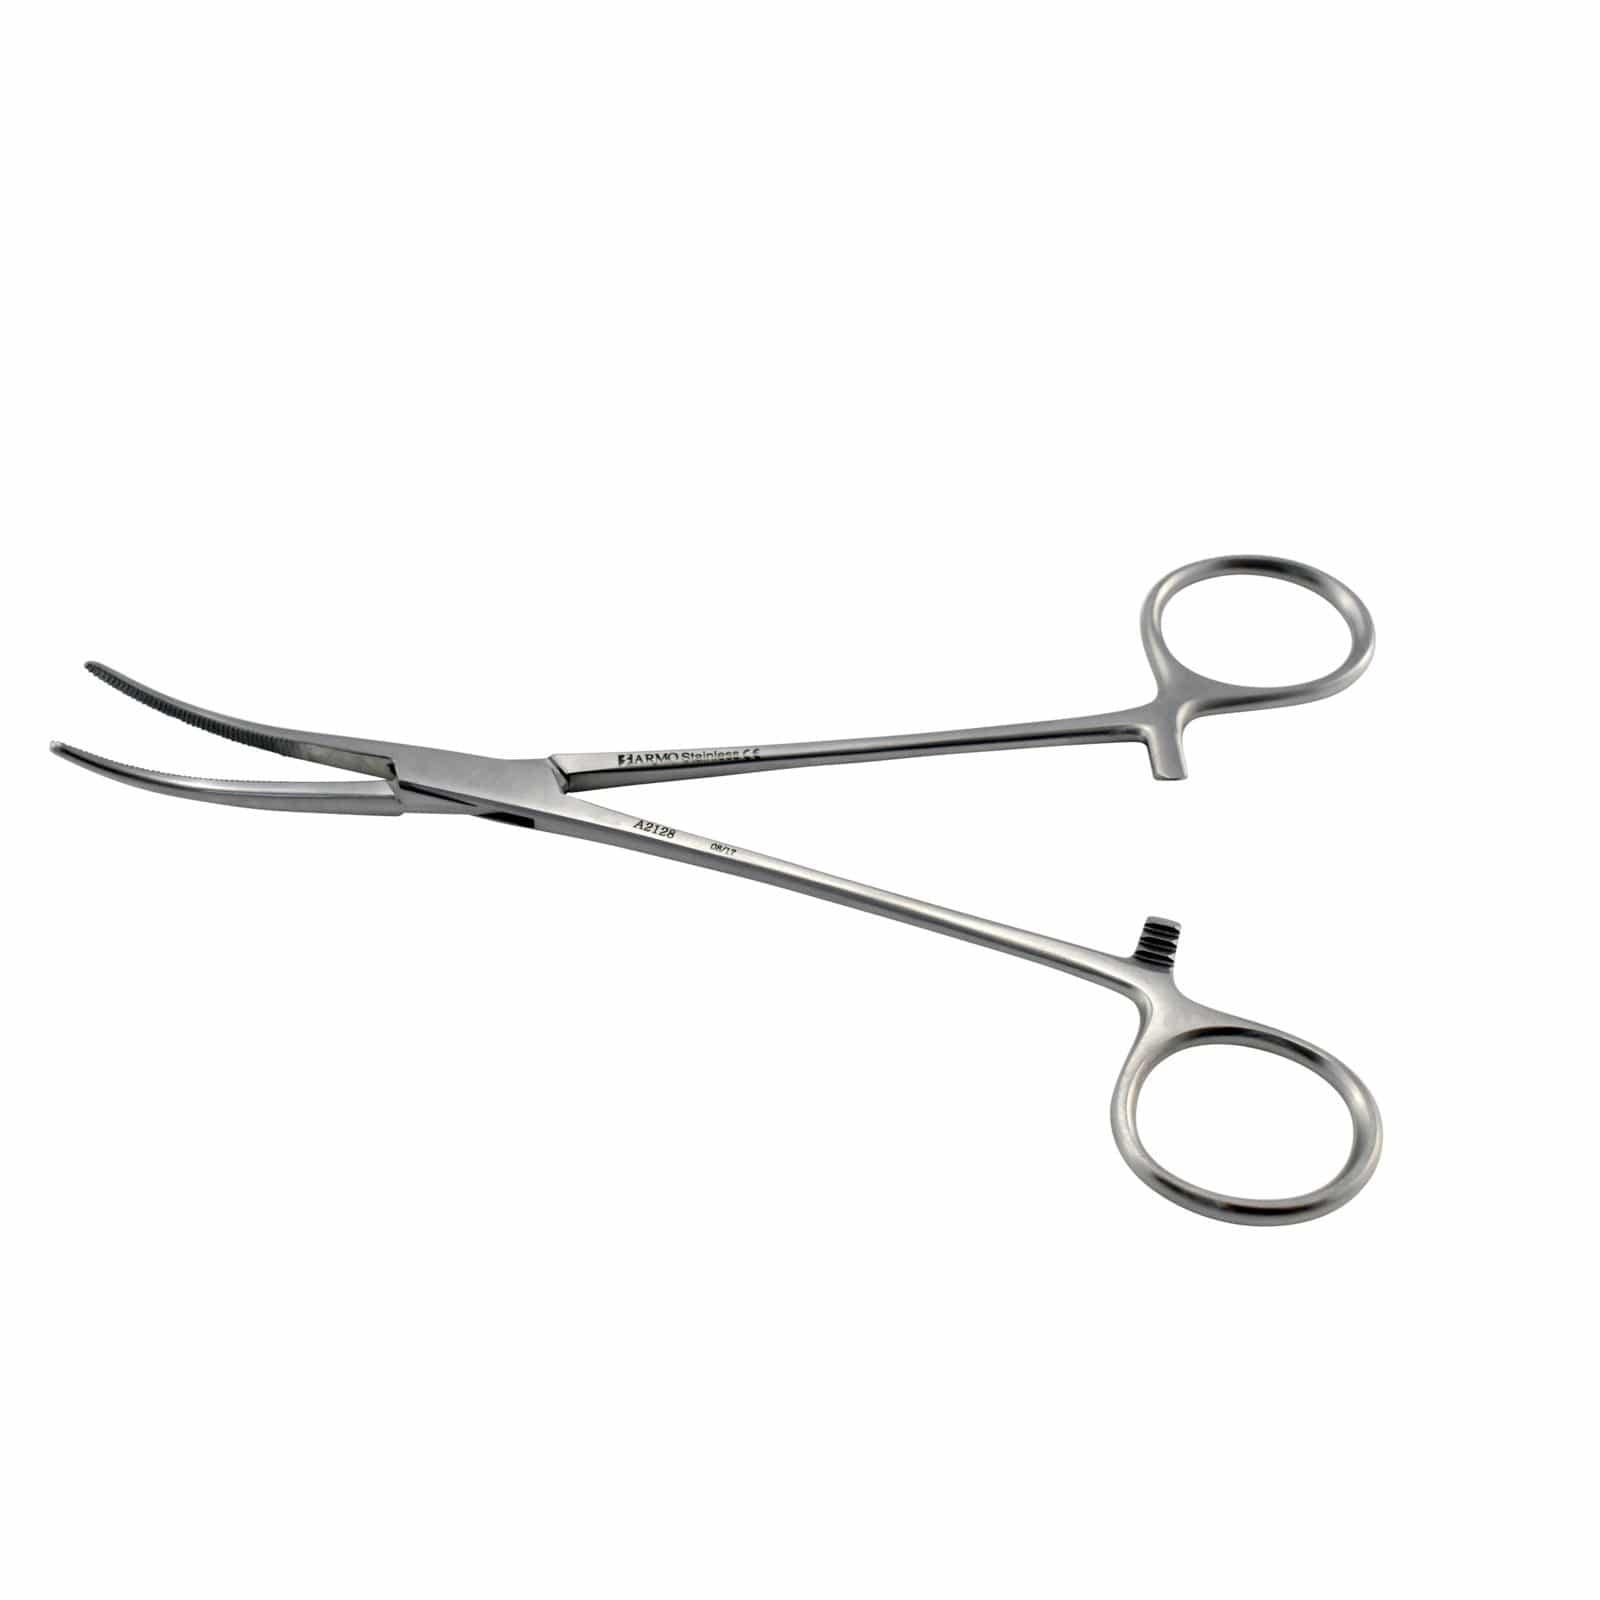 Armo Surgical Instruments 18cm / Curved Armo Kelly Artery Forceps